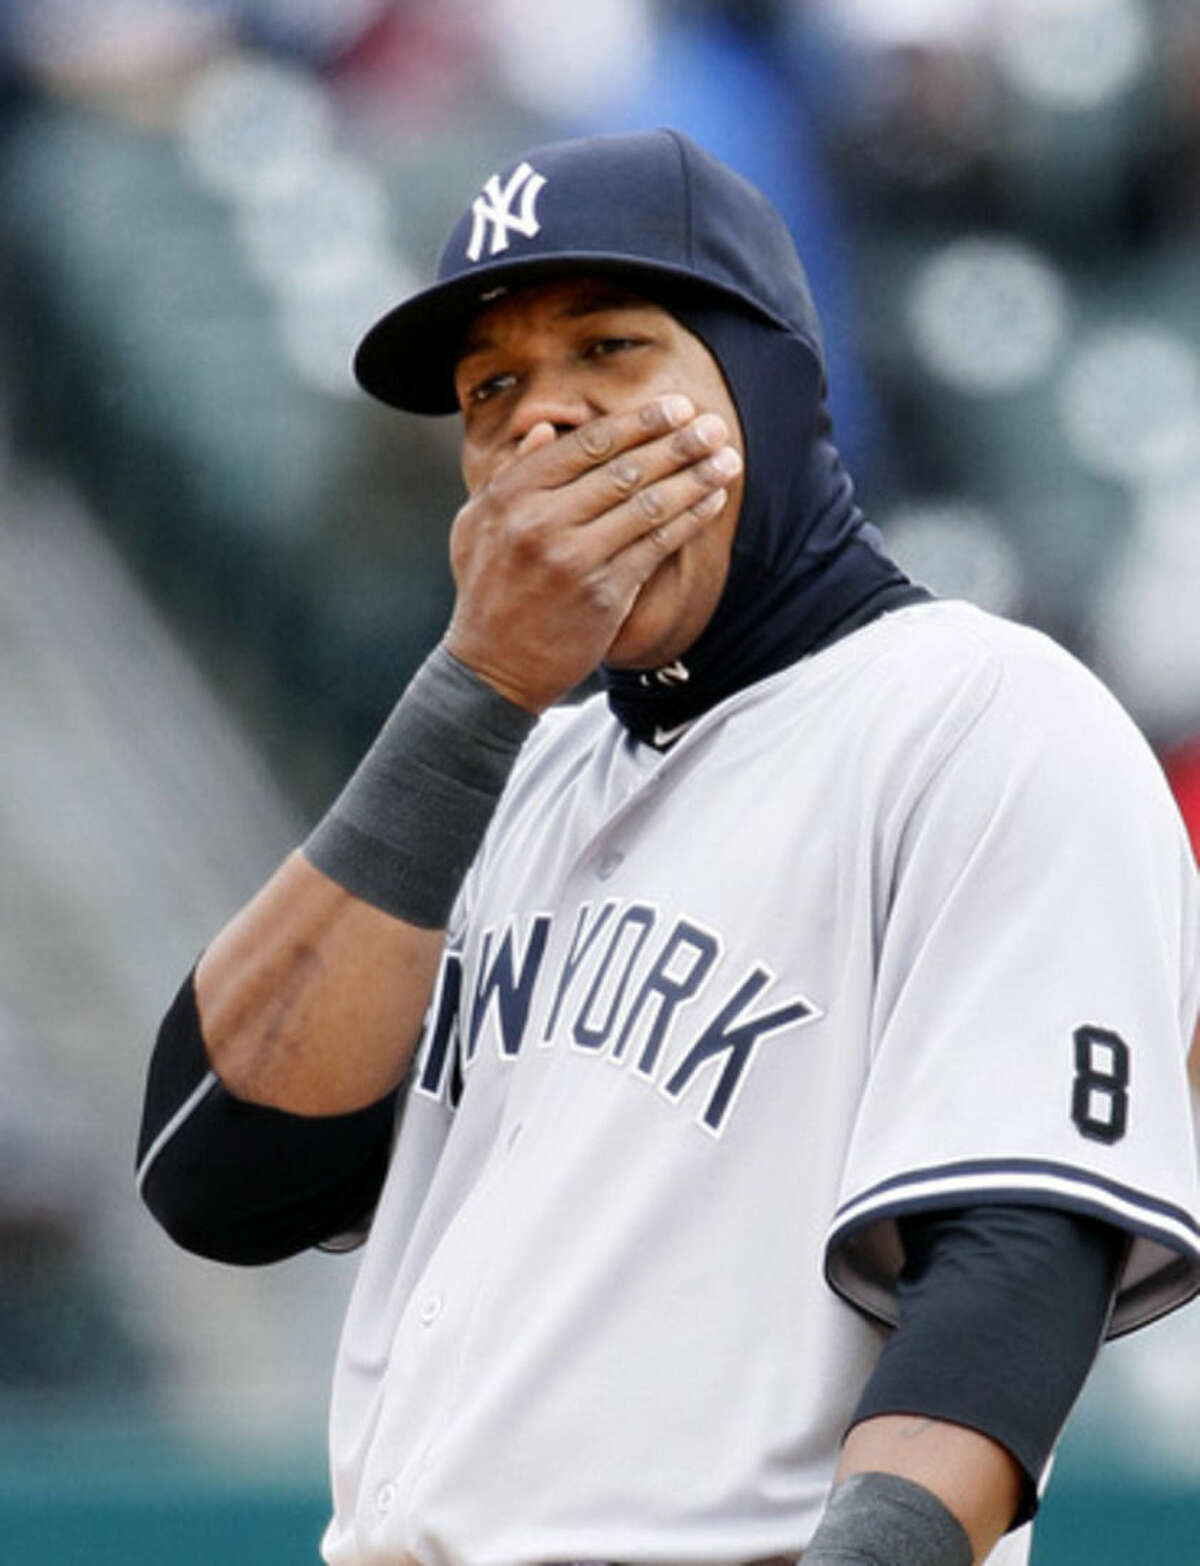 New York Yankees' Starlin Castro tries to keep his hand warm while playing second base against the Detroit Tigers during the fourth inning of a baseball game Saturday, April 9, 2016, in Detroit. (AP Photo/Duane Burleson)